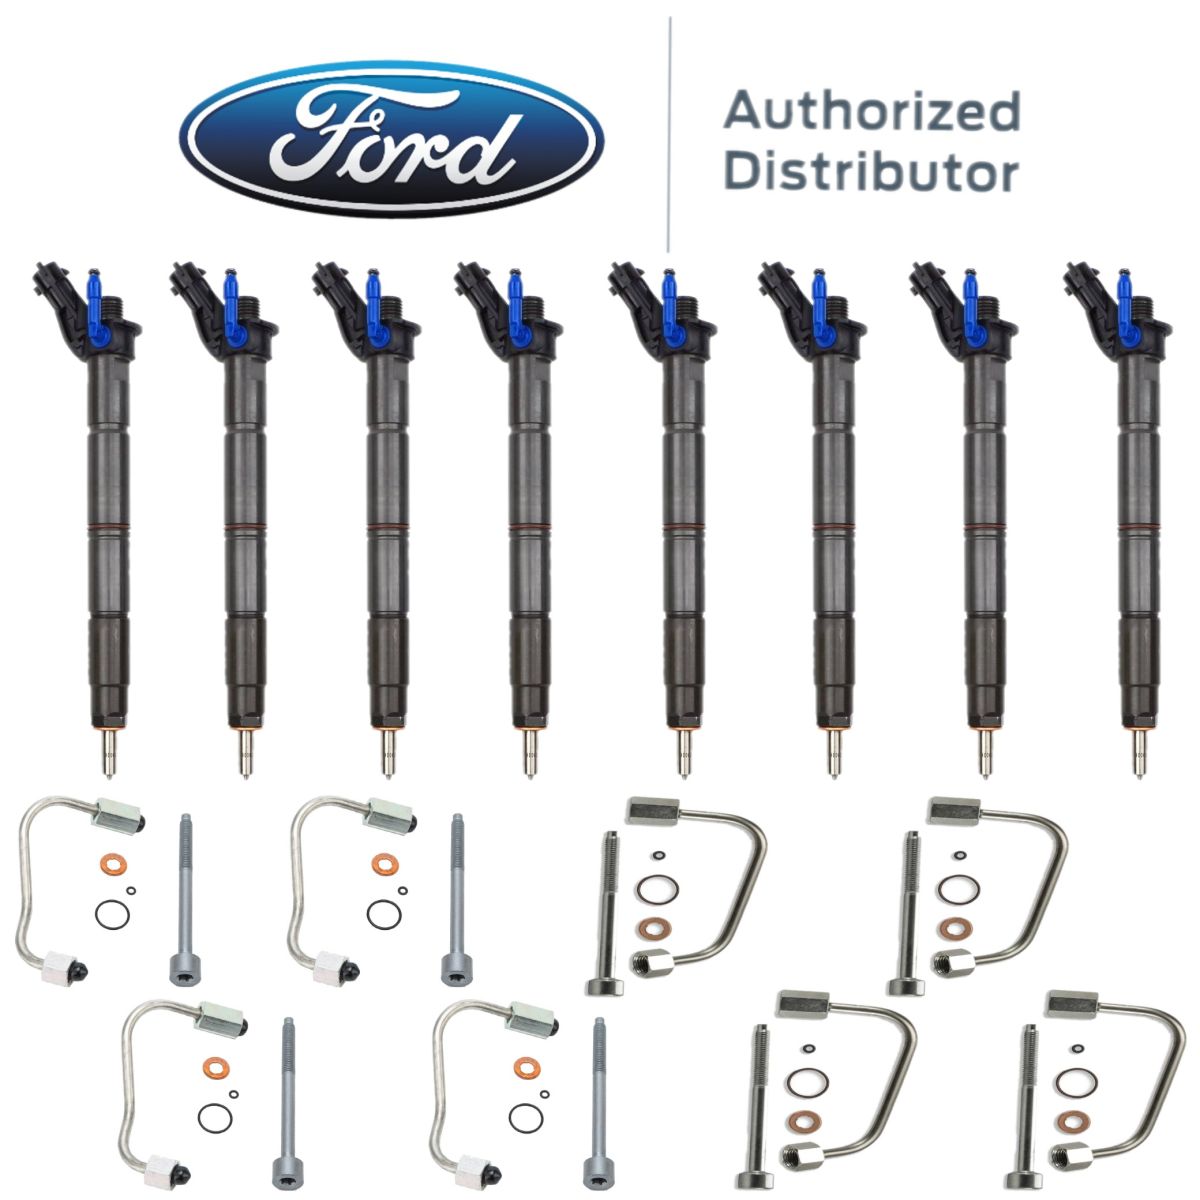 OEM Ford - OEM Ford (8) Fuel Injectors With Lines & Bolts For 2015-2019 Ford 6.7L Powerstroke